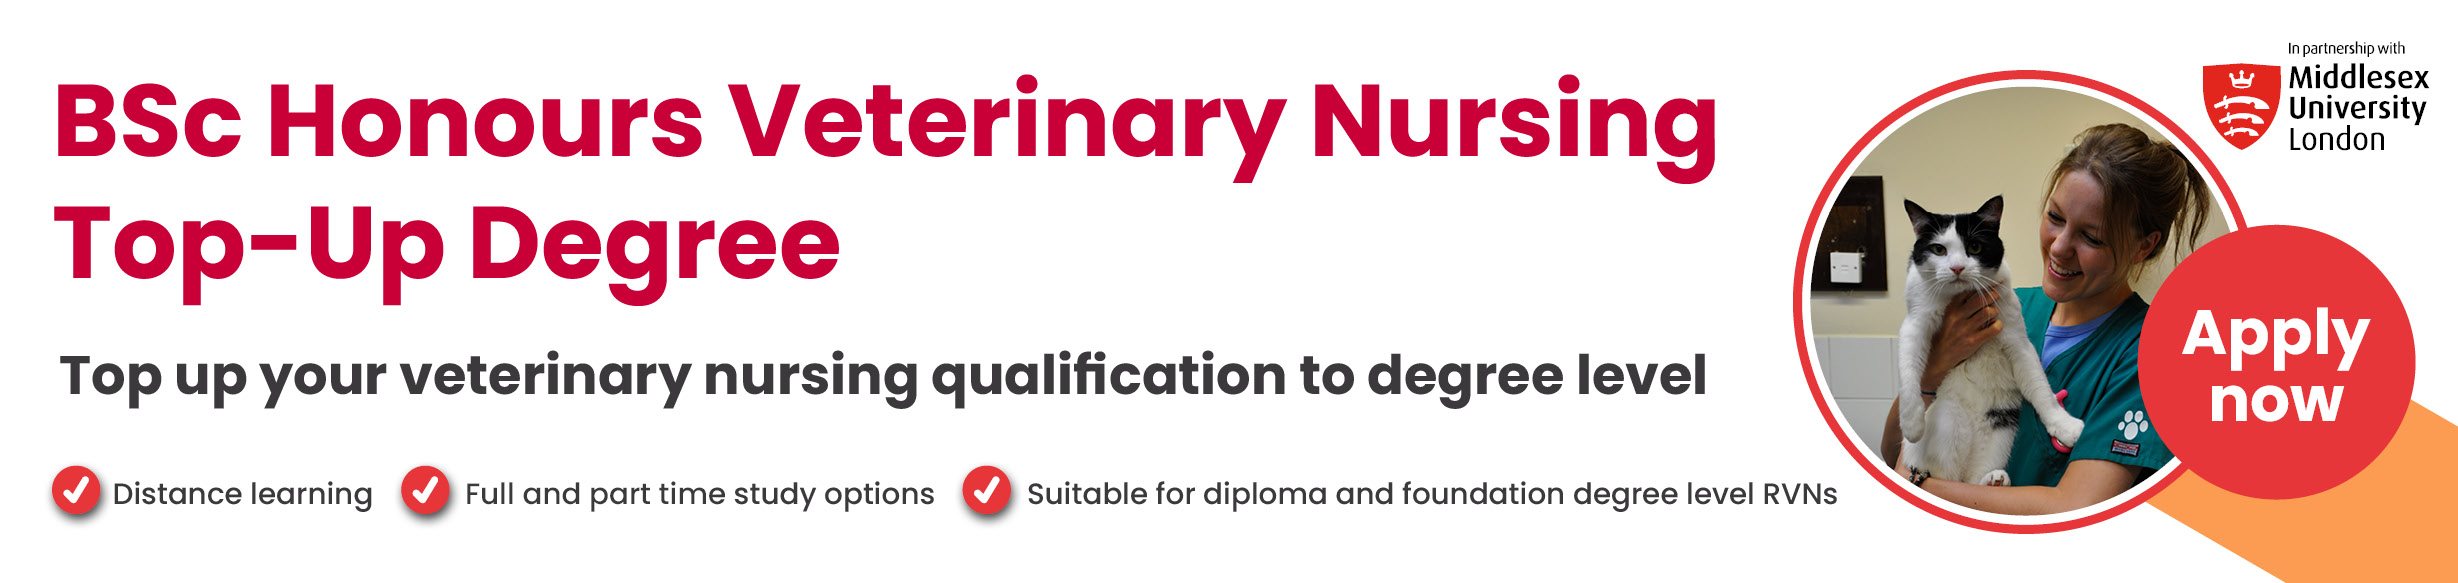 Course: BSc Honours Veterinary Nursing Top-Up Degree (Middlesex University)